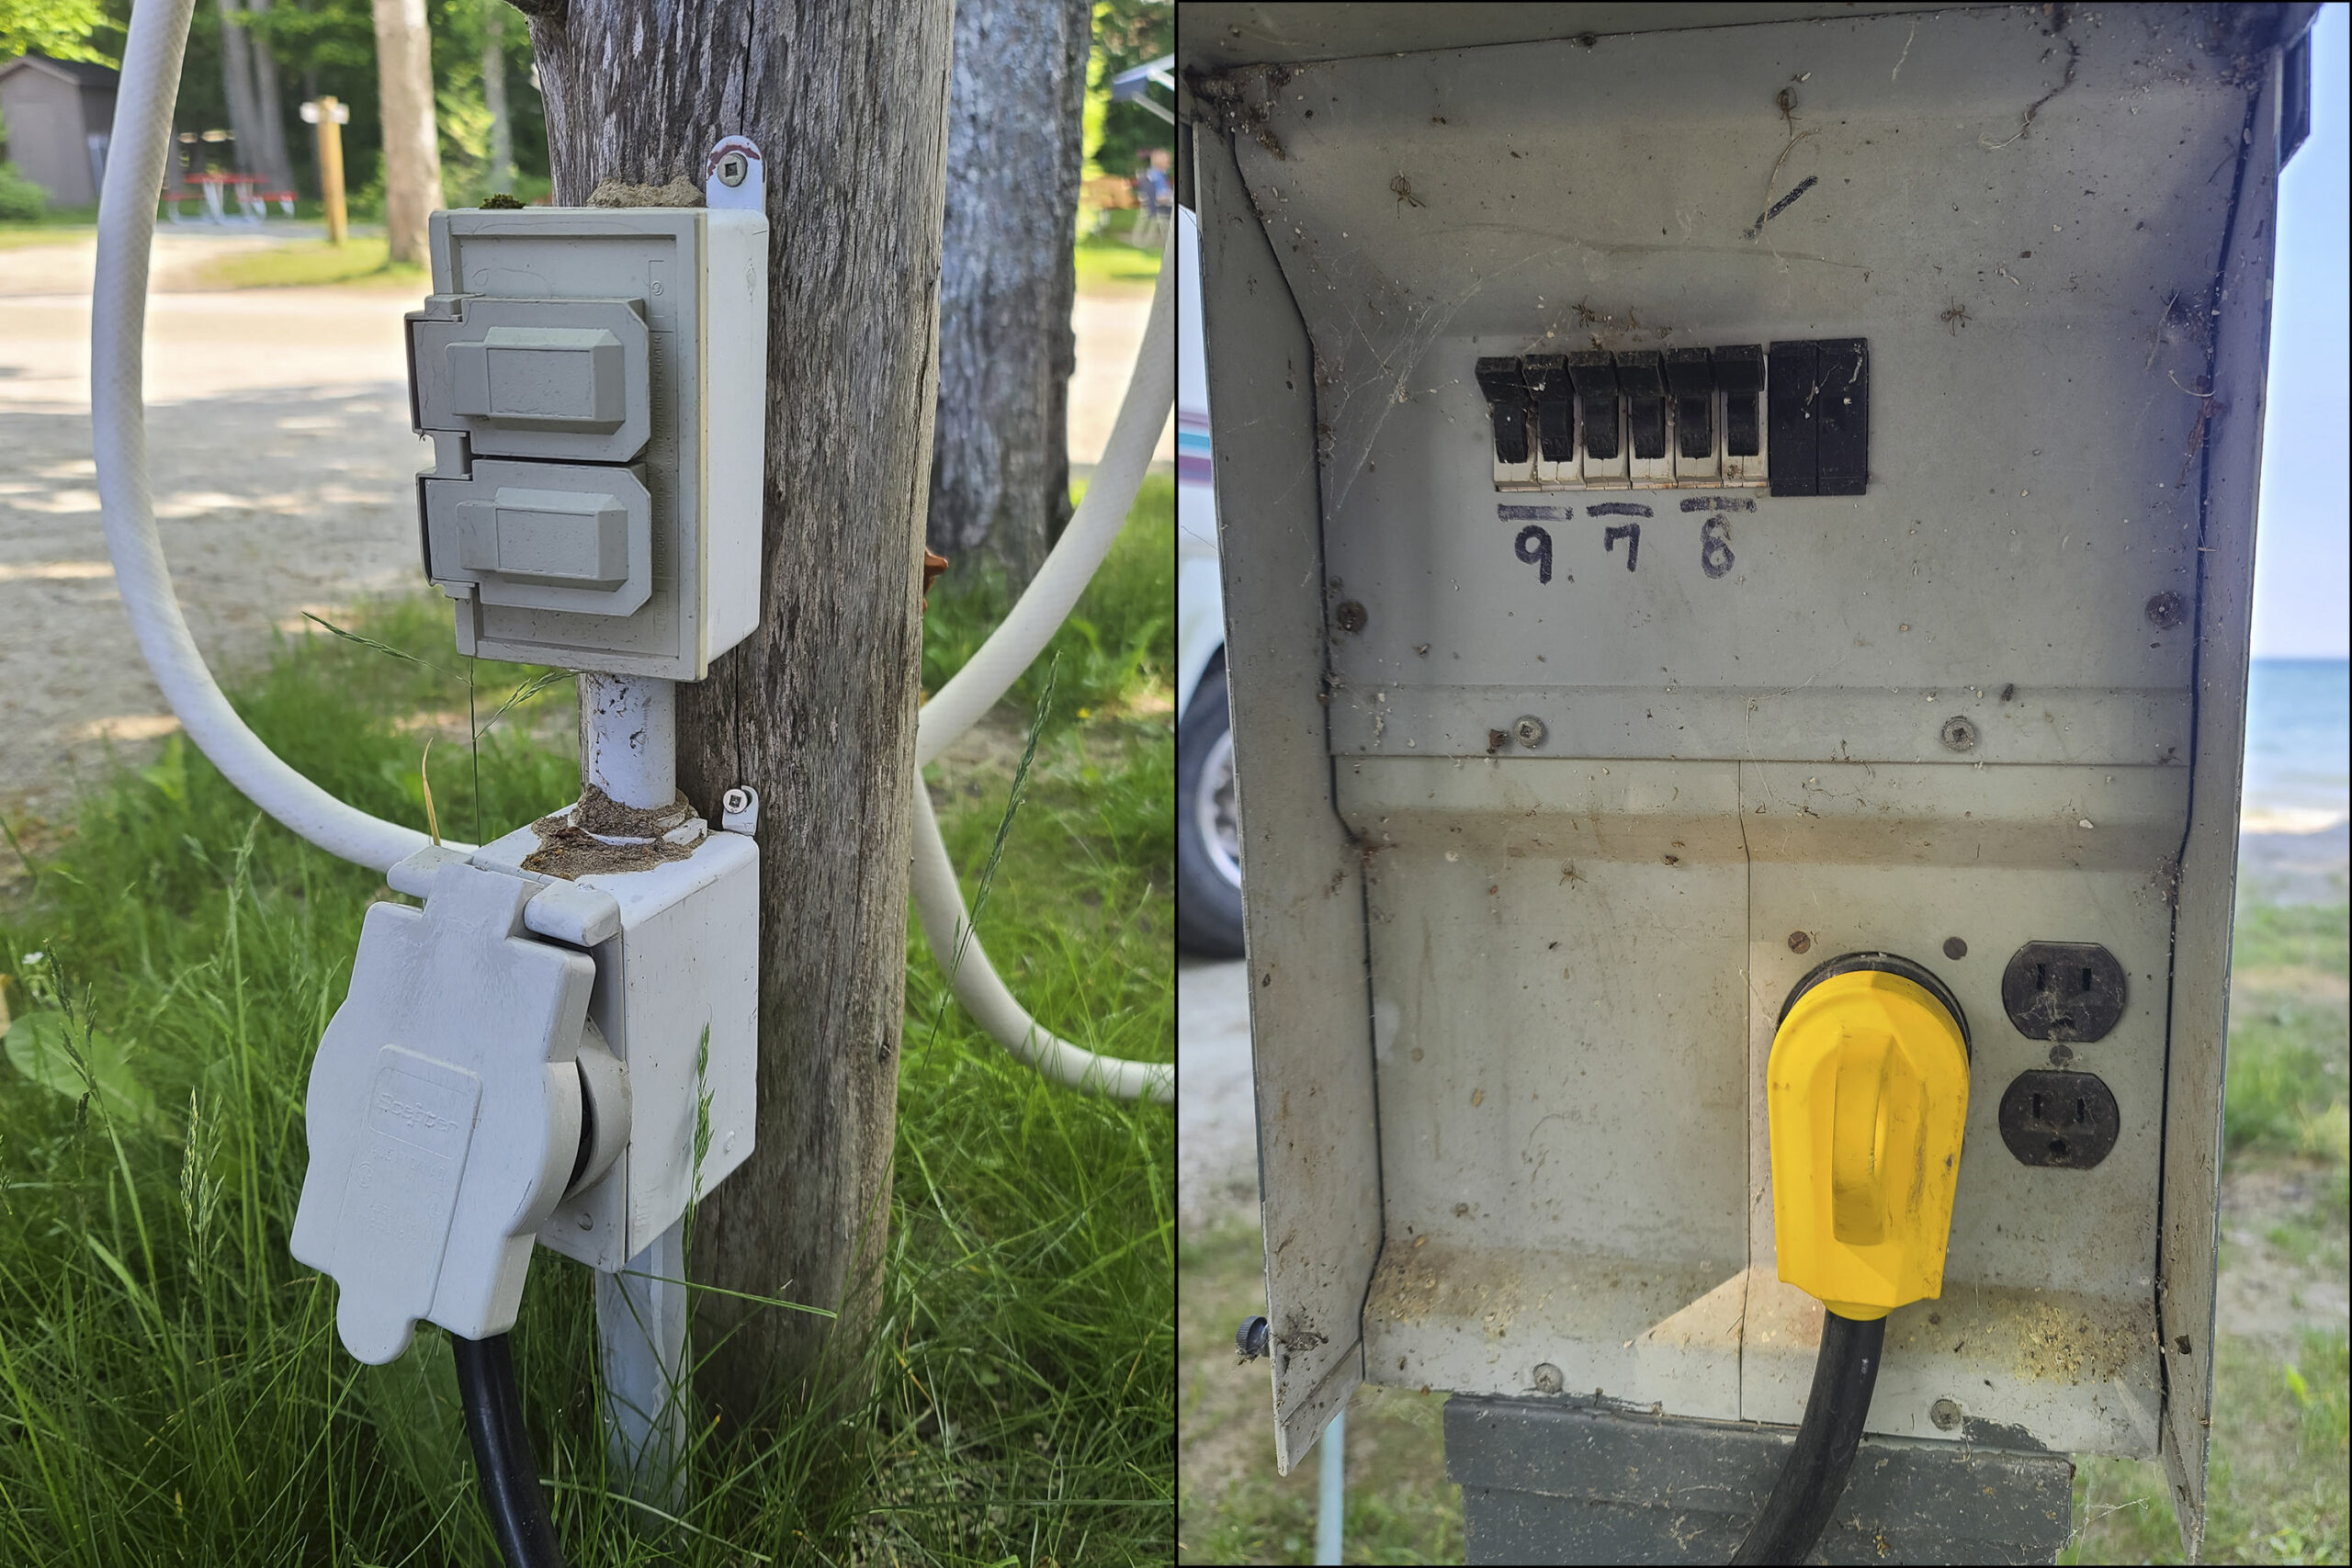 On the left, an RV plug at a campground. On the right, a combined RV plug and electrical panel.